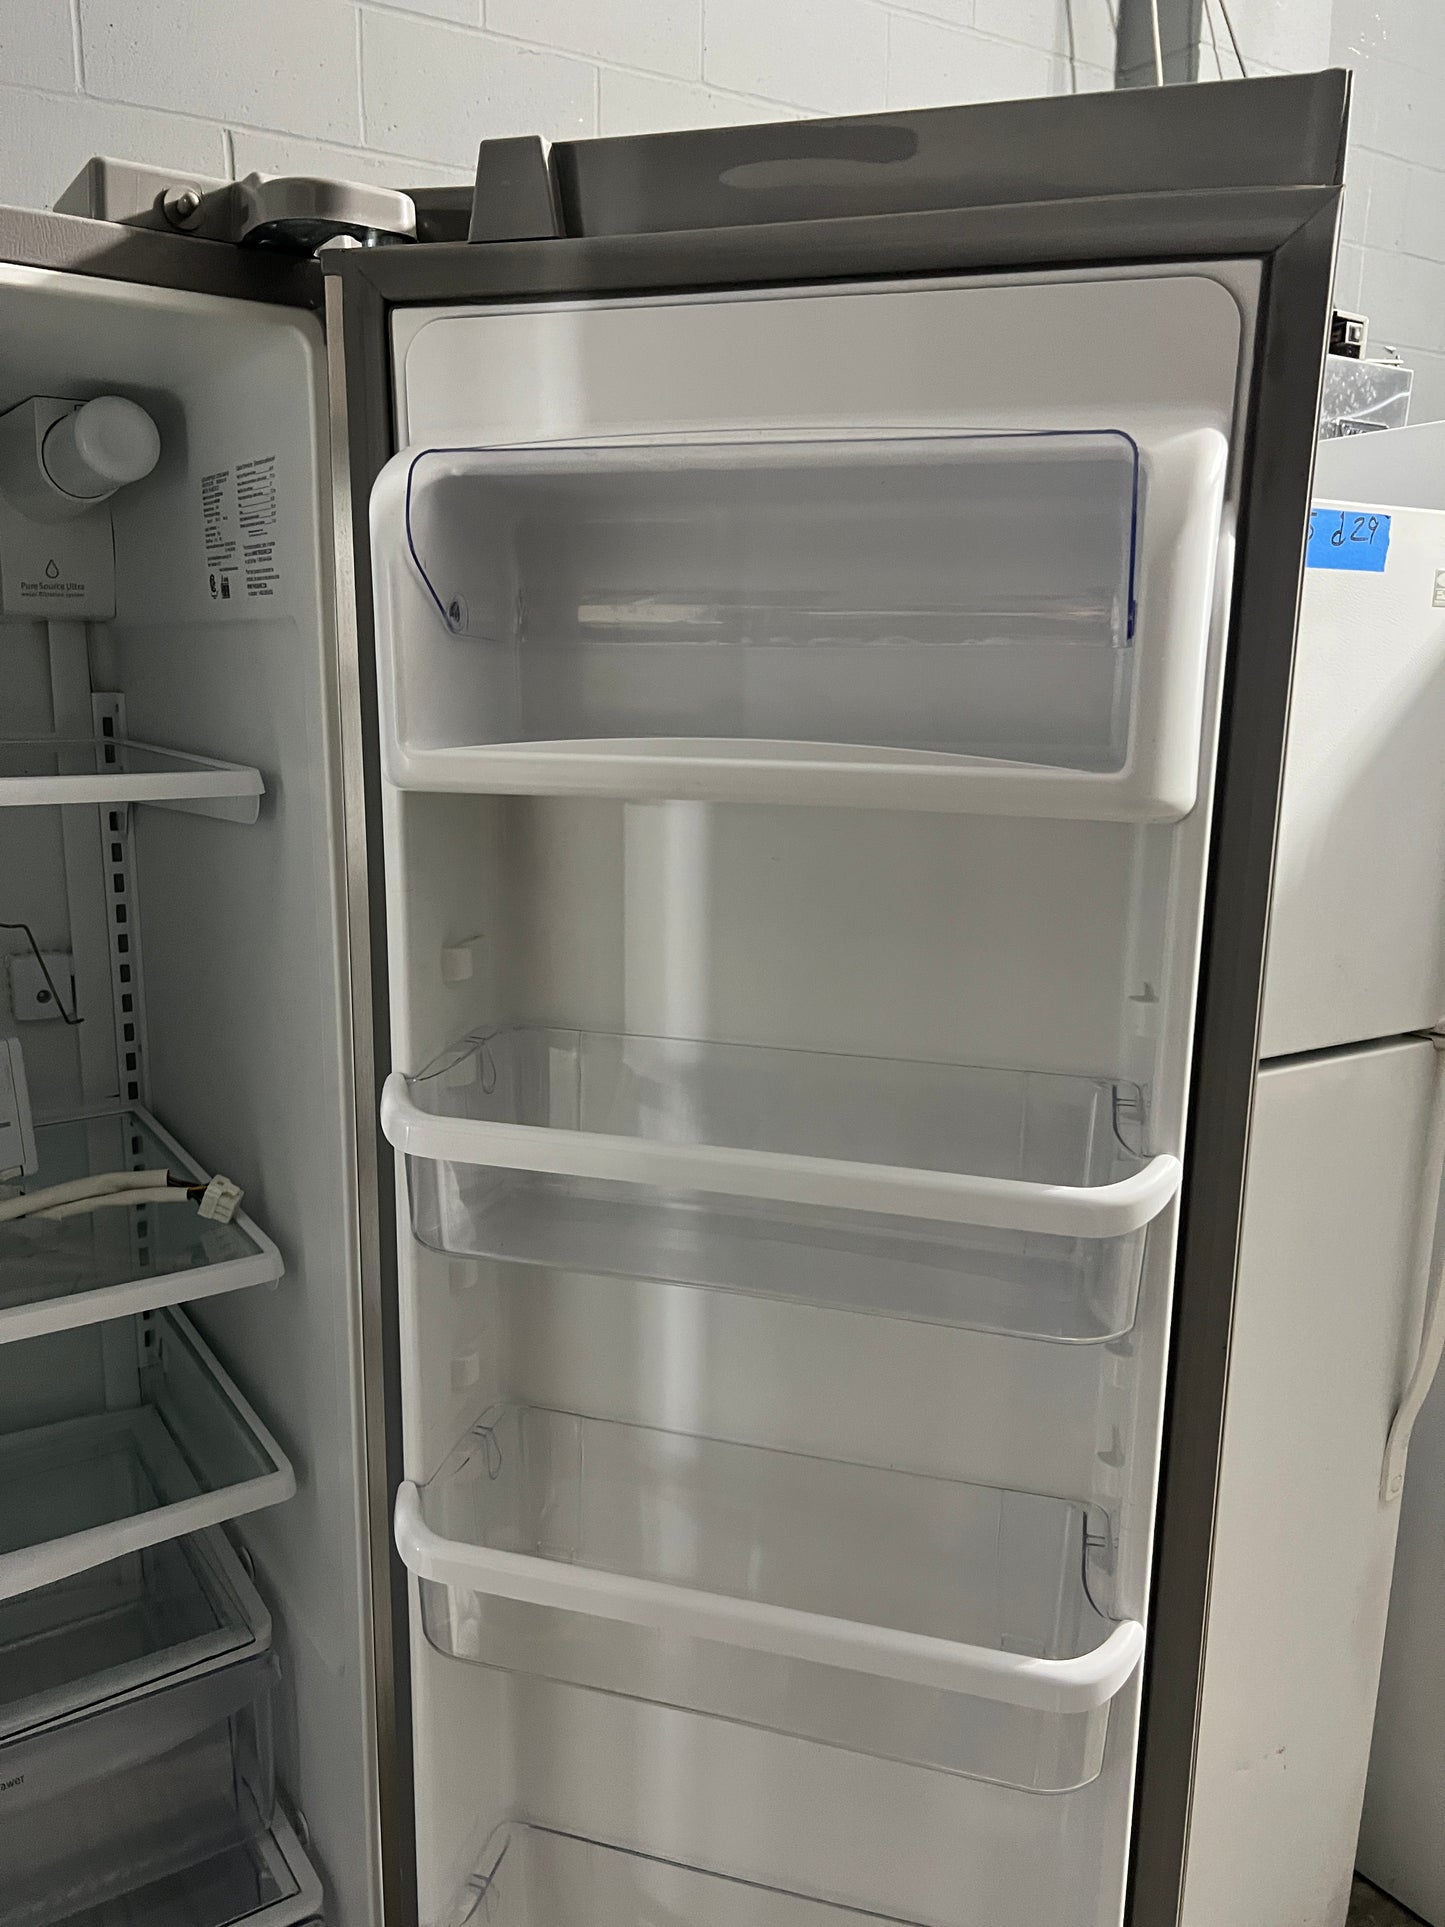 36" Frigidaire Side by Side Stainless Steel Refrigerator No Ice Maker